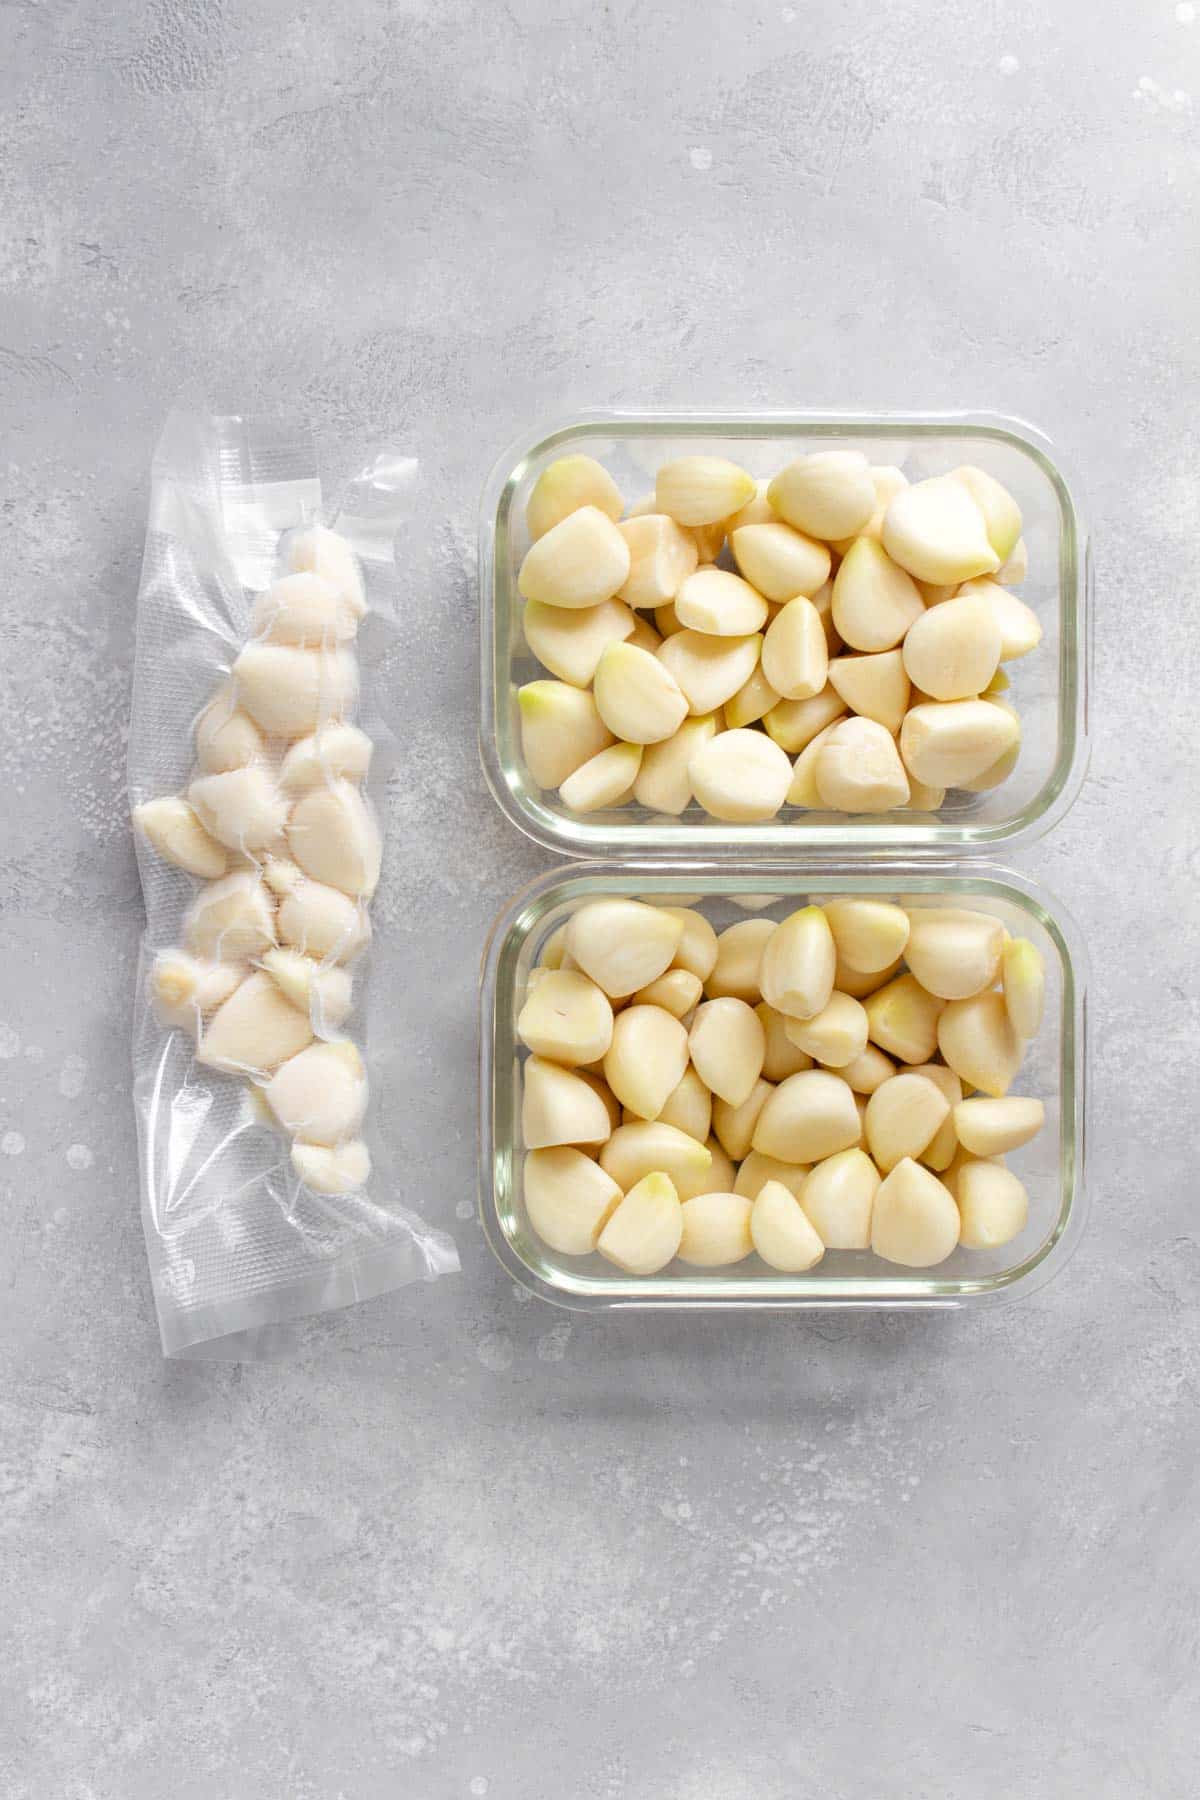 Frozen garlic cloves in two containers and some vacuum sealed.